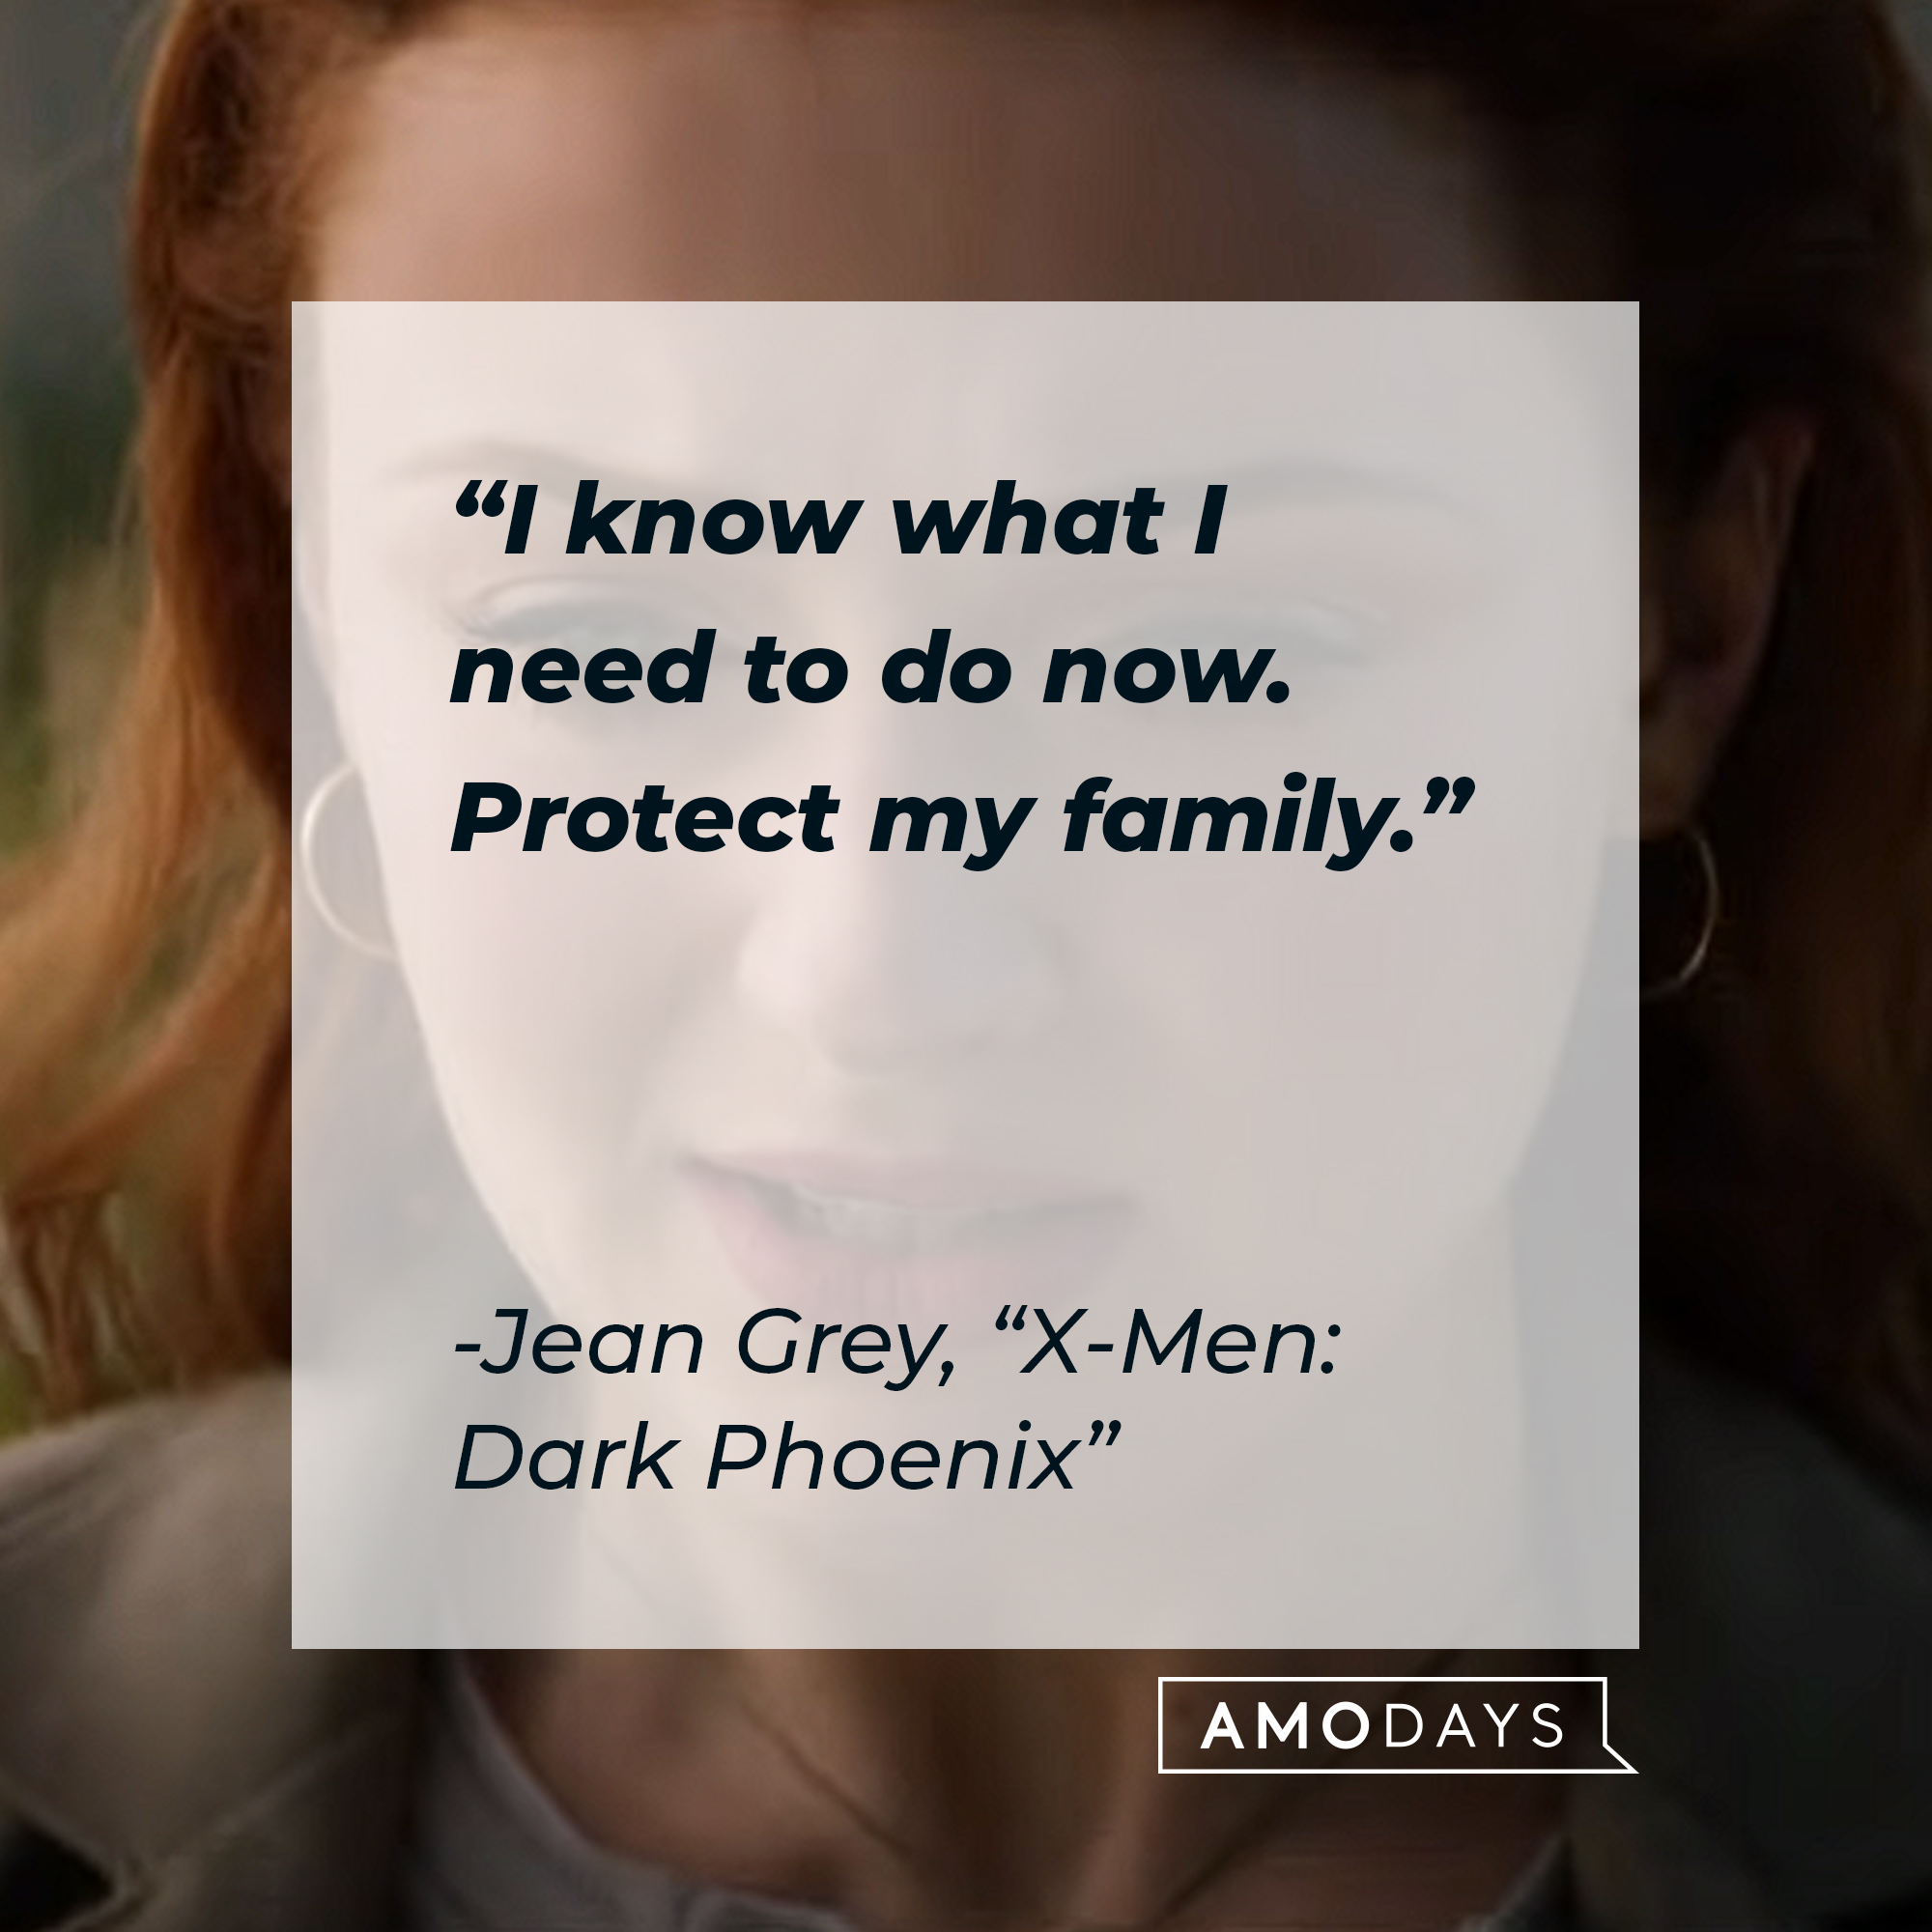 Jean Grey’s quote: "I know what I need to do now. Protect my family." | Image: Youtube.com/20thCenturyStudios